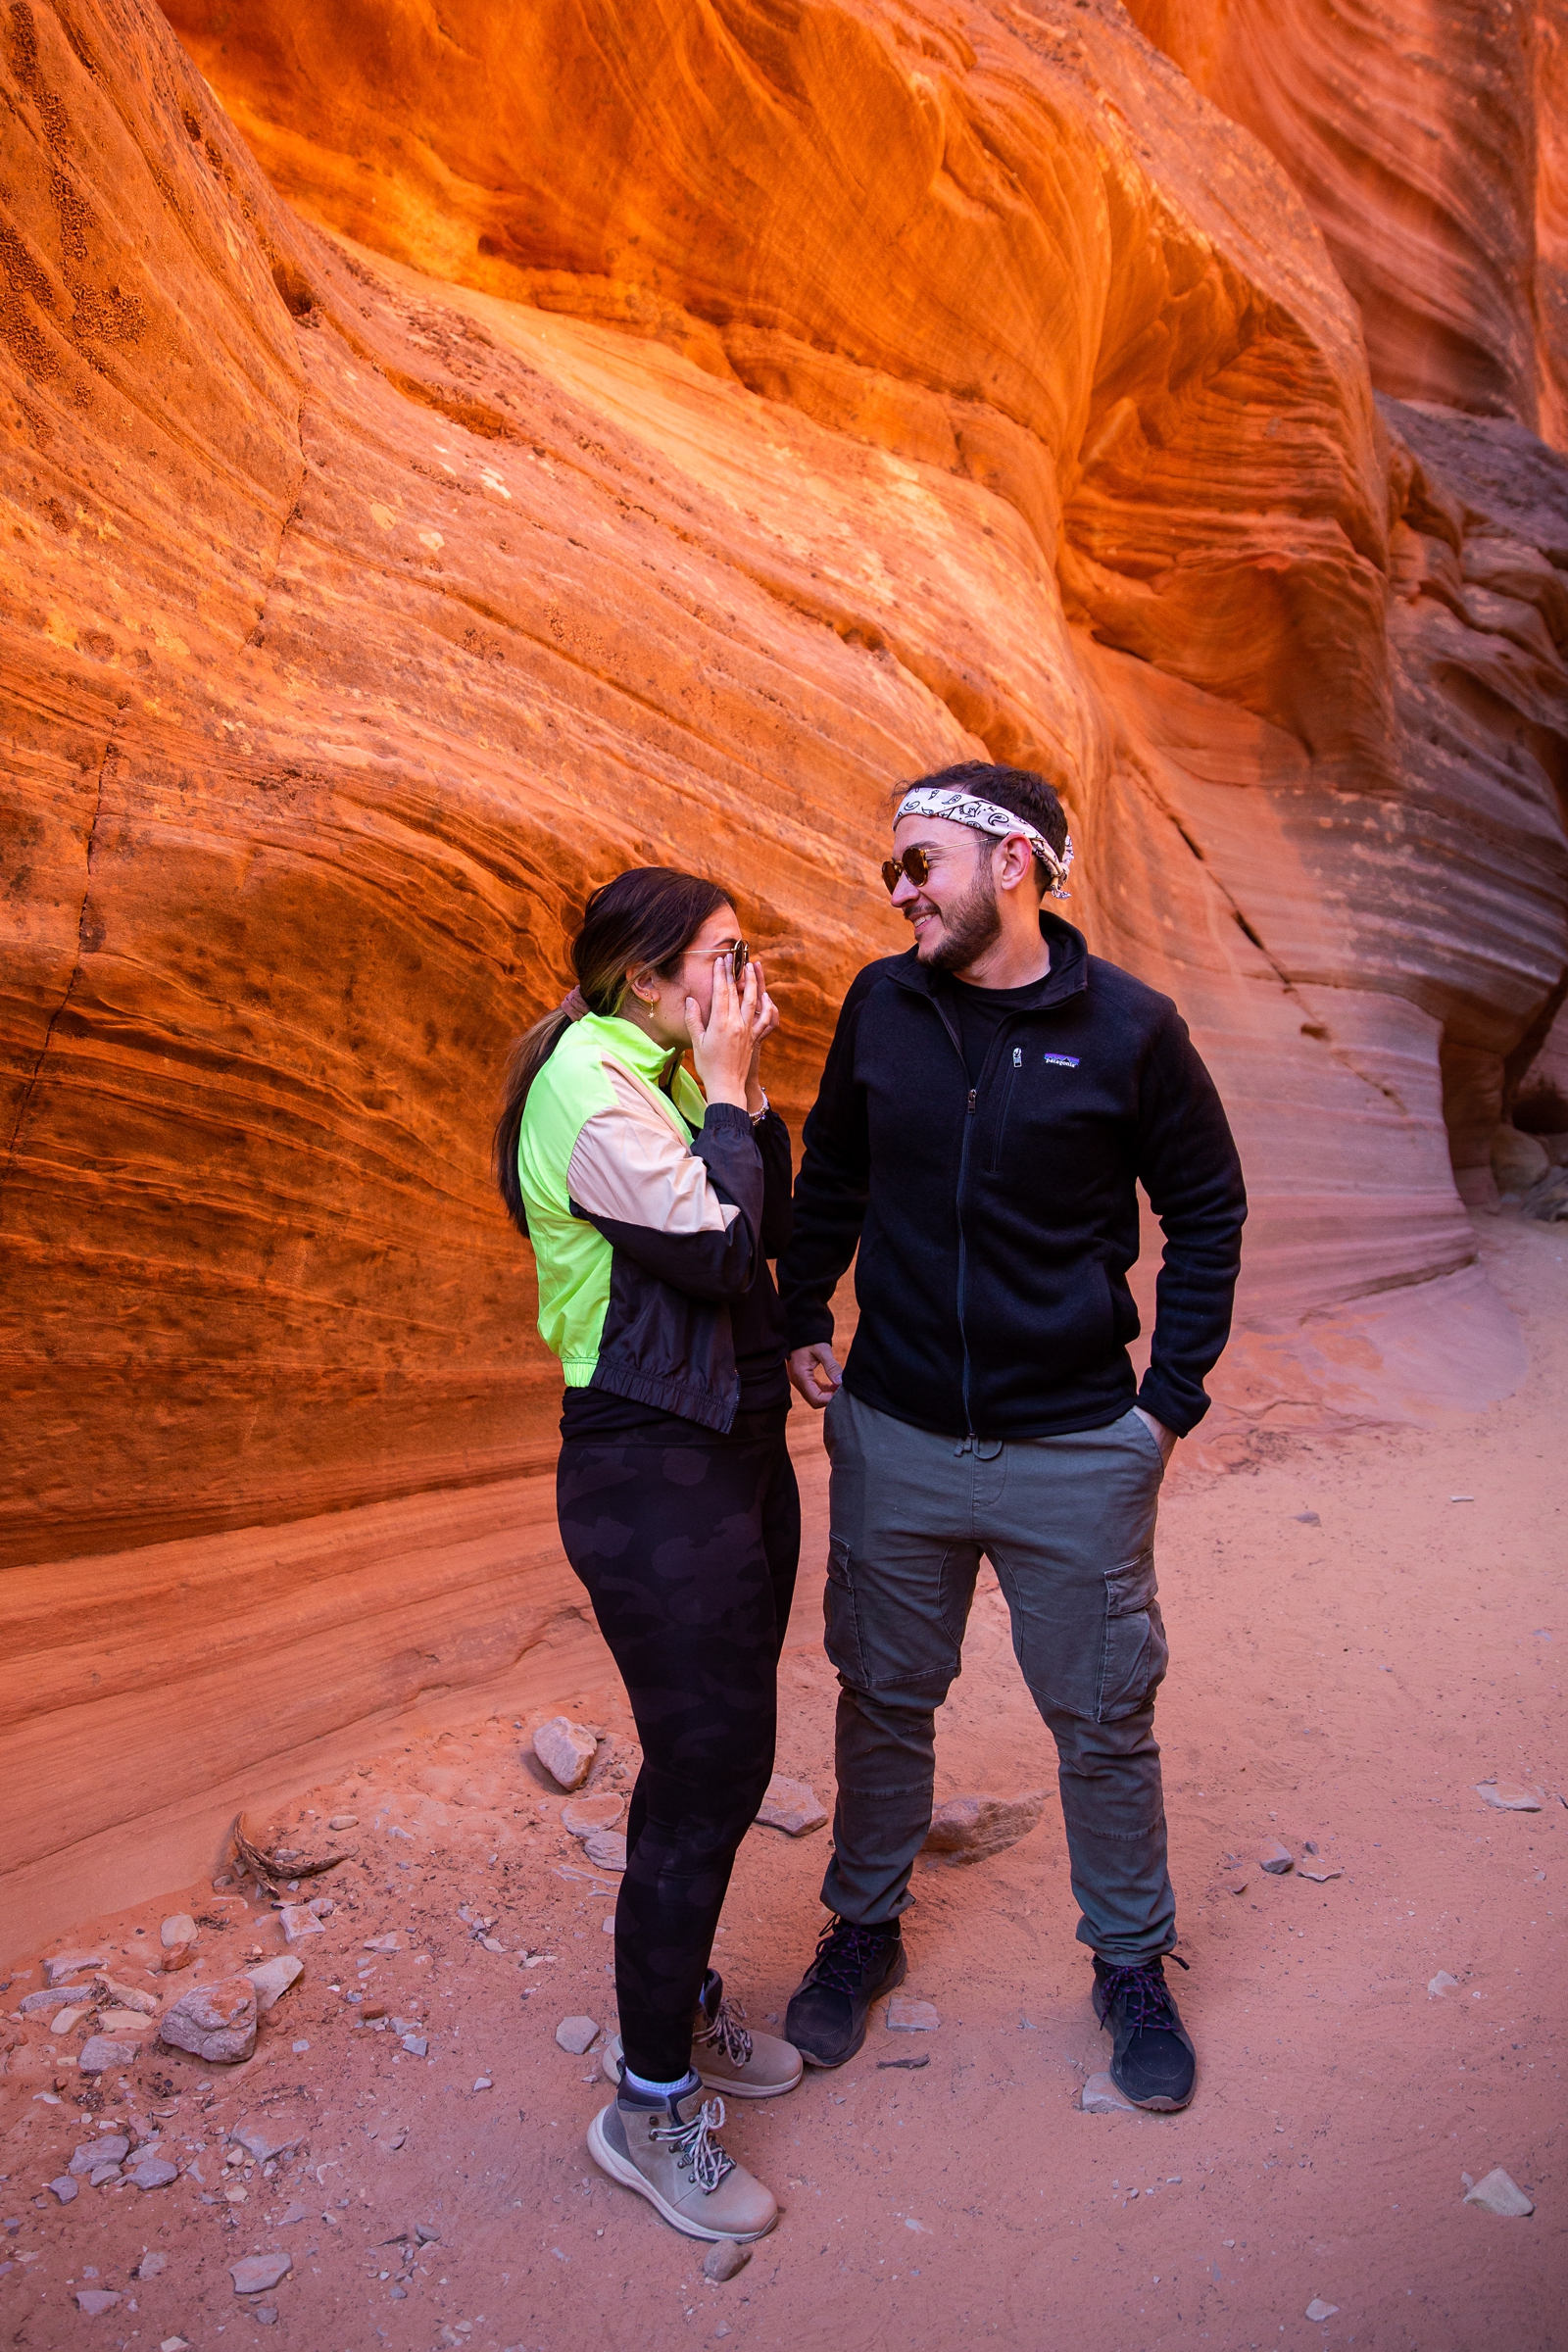 A newly engaged couple joyfully wiping tears away and looking so happy in the Utah slot canyon